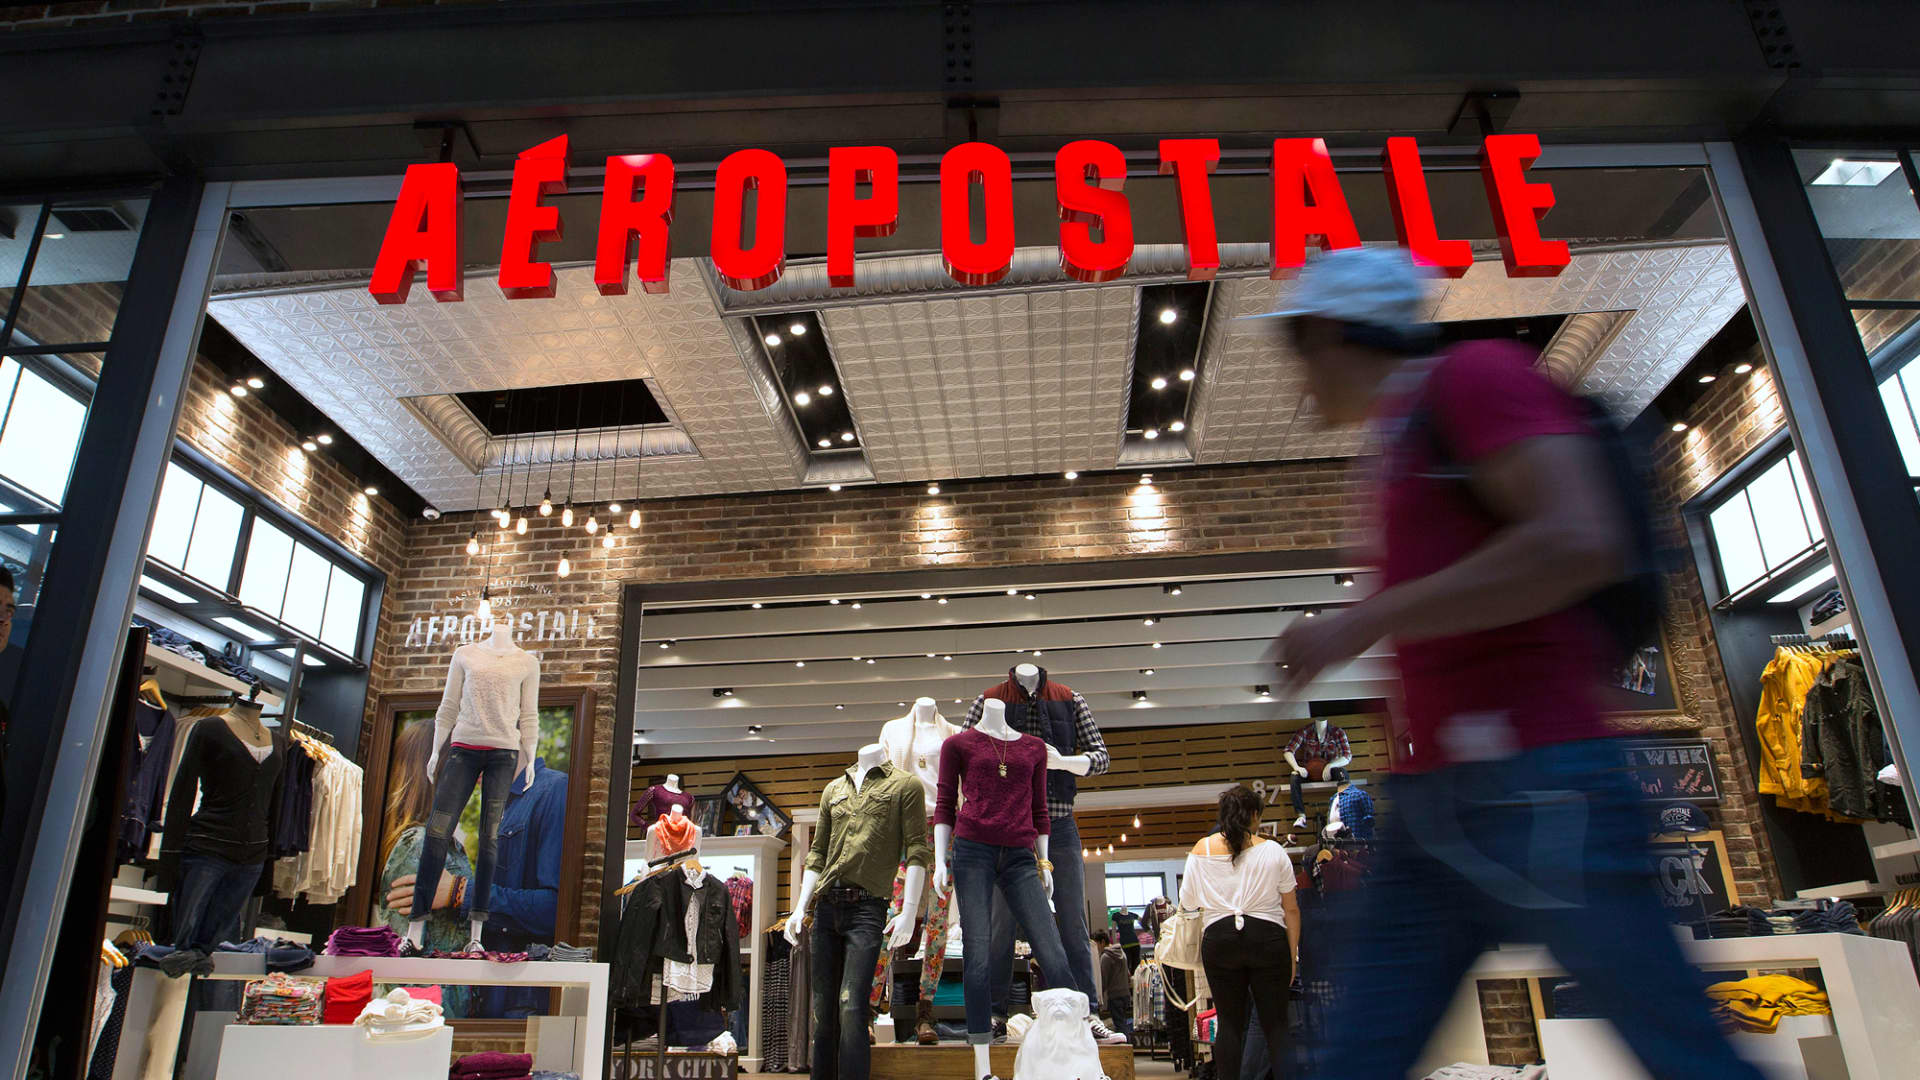 4 reasons why Aeropostale lost its cool